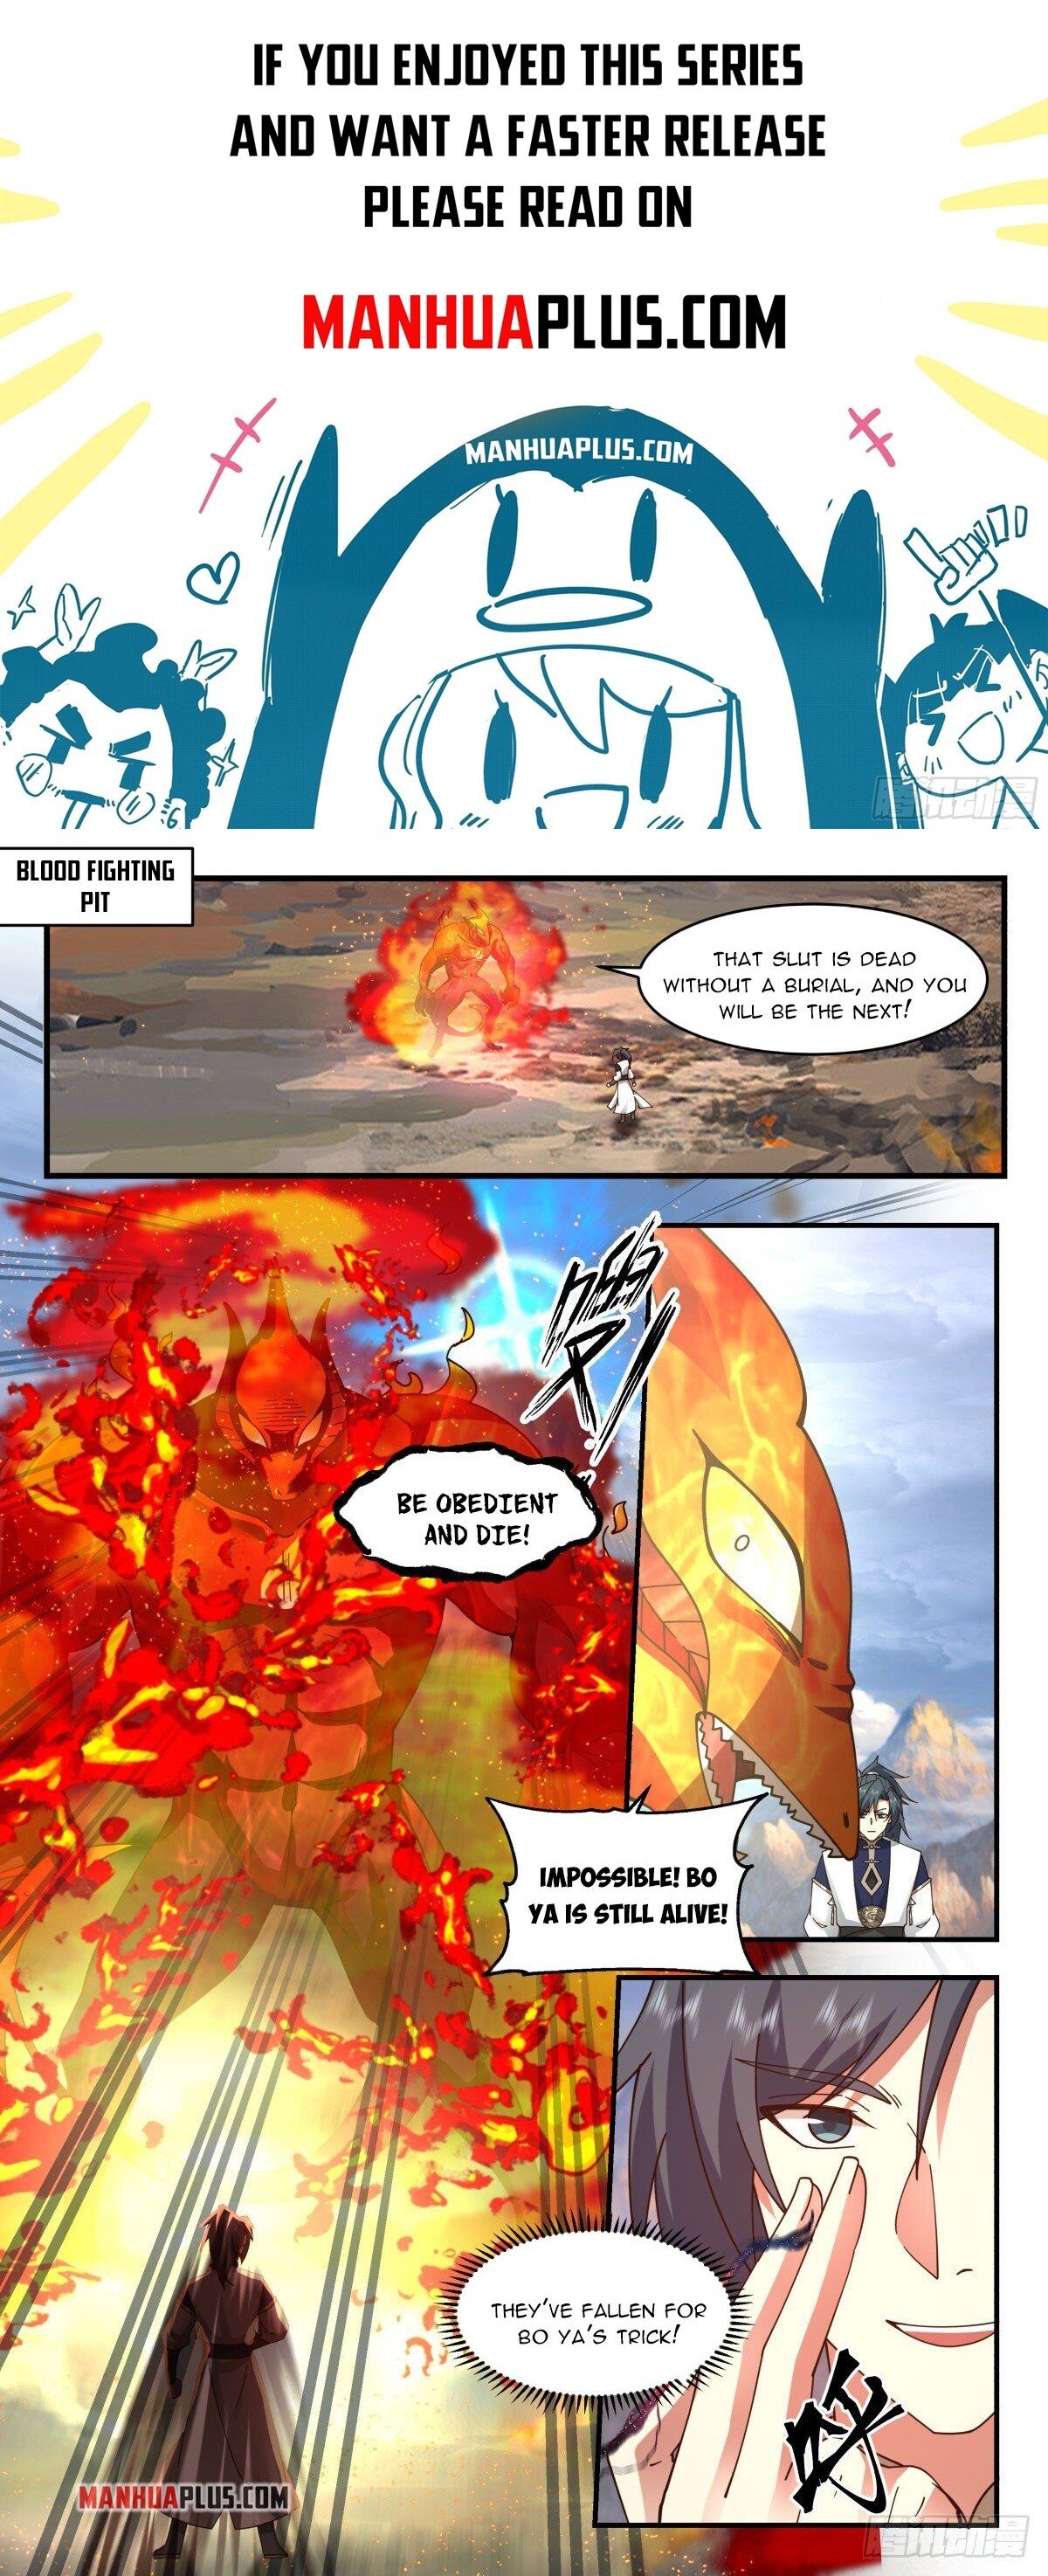 Martial Peak - Chapter 15279 - Burning the bridge after crossing the river - Image 1